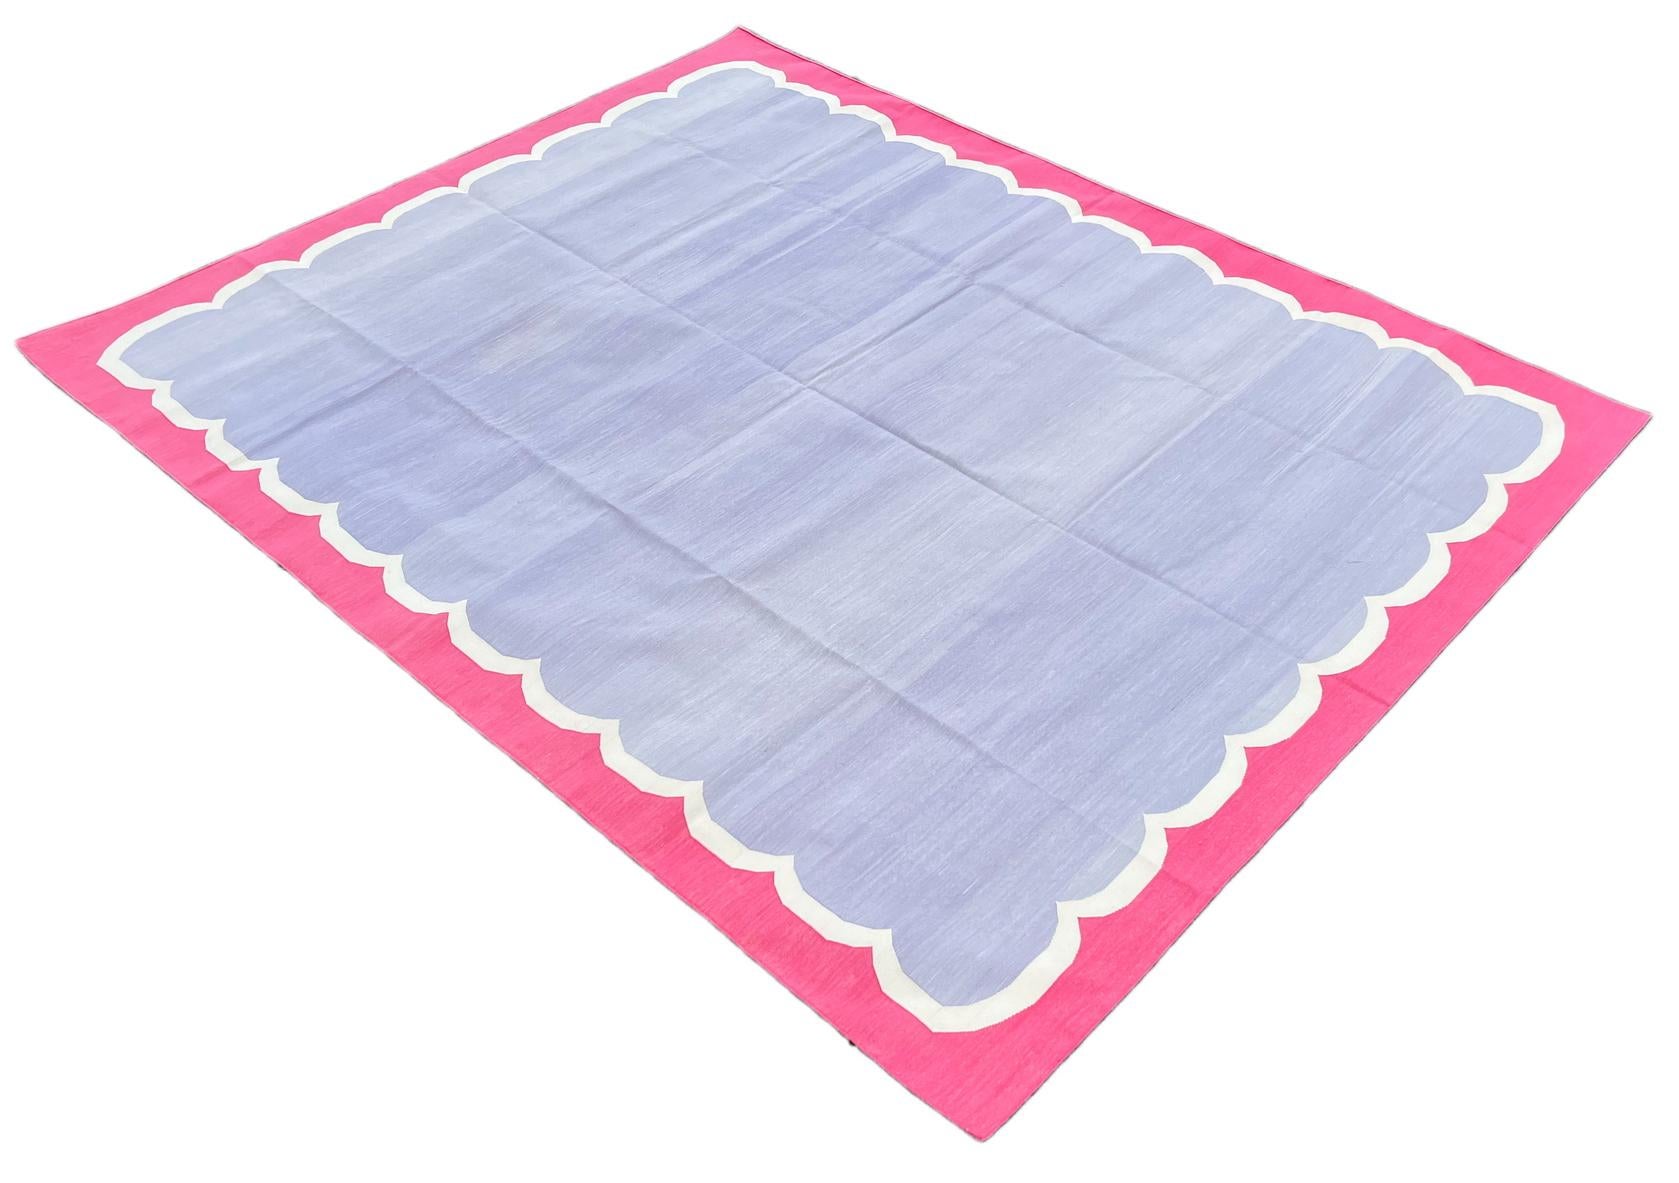 Cotton Vegetable Dyed Lavender And Pink Scalloped Striped Indian Dhurrie Rug-8'x10' 
These special flat-weave dhurries are hand-woven with 15 ply 100% cotton yarn. Due to the special manufacturing techniques used to create our rugs, the size and